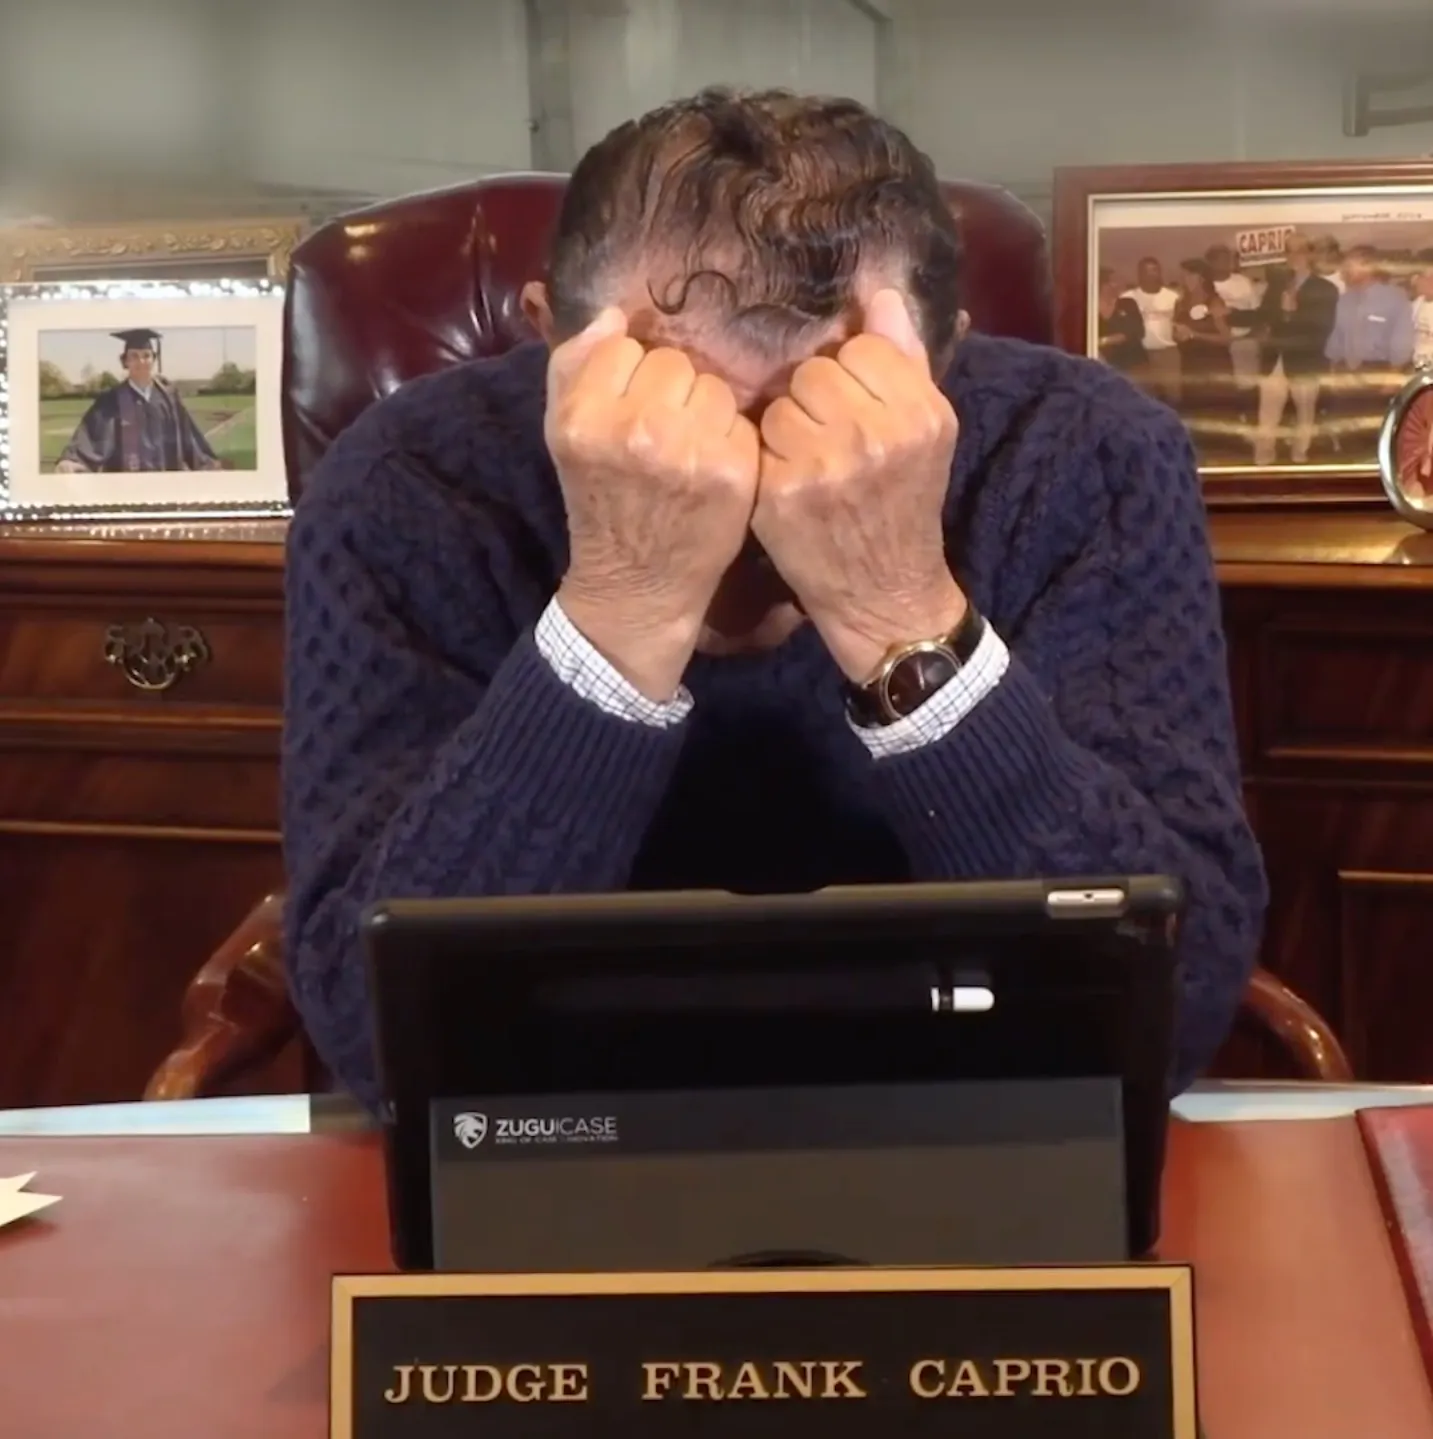 Renowned TV Judge Frank Caprio, noted for his unique courtroom style, recently shared some very personal news with his viewers.